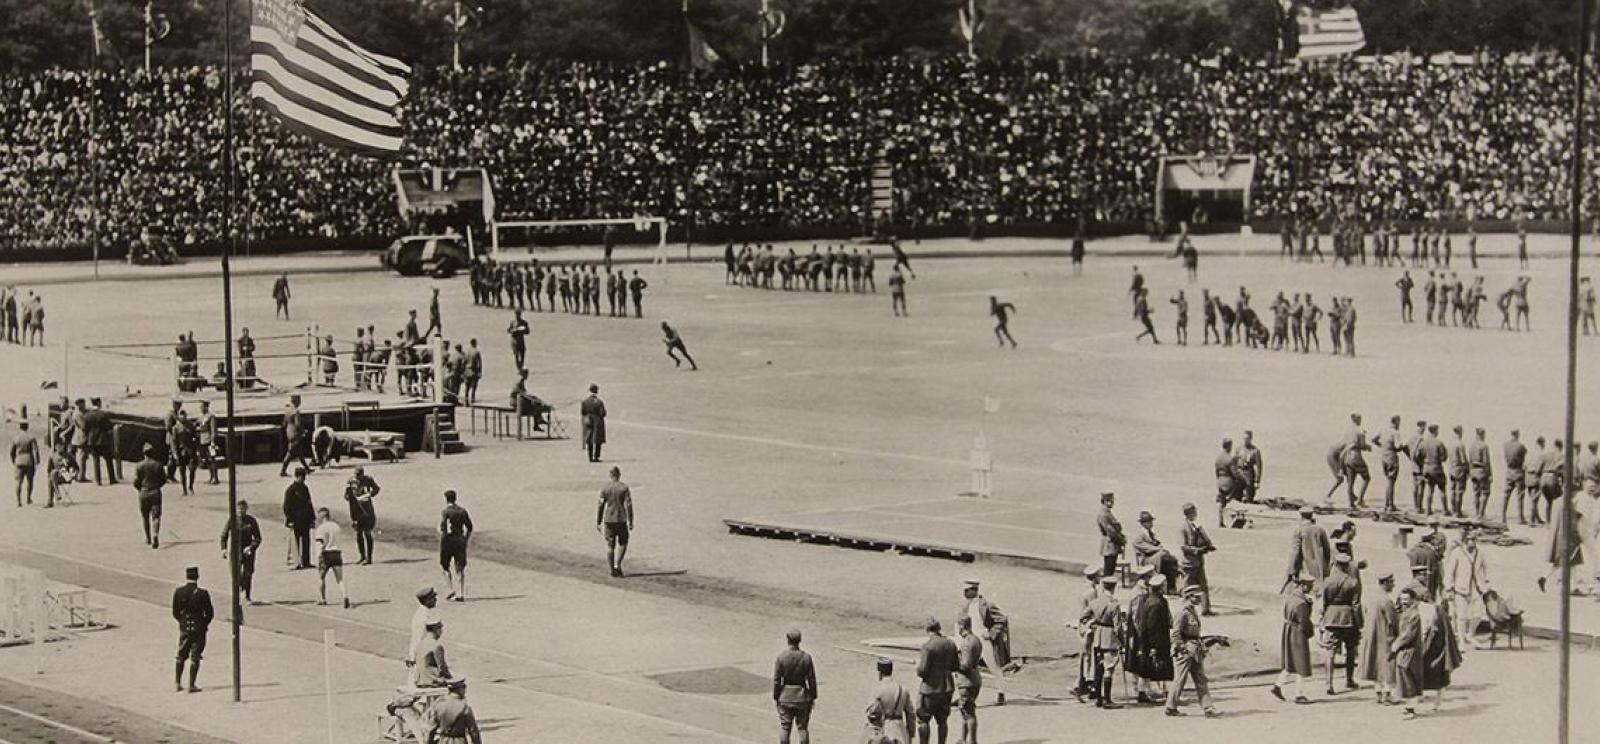 Black and white photograph. View of a wide open sports field in a stadium filled with spectators. Different track and field events are taking place in different spots on the field. 